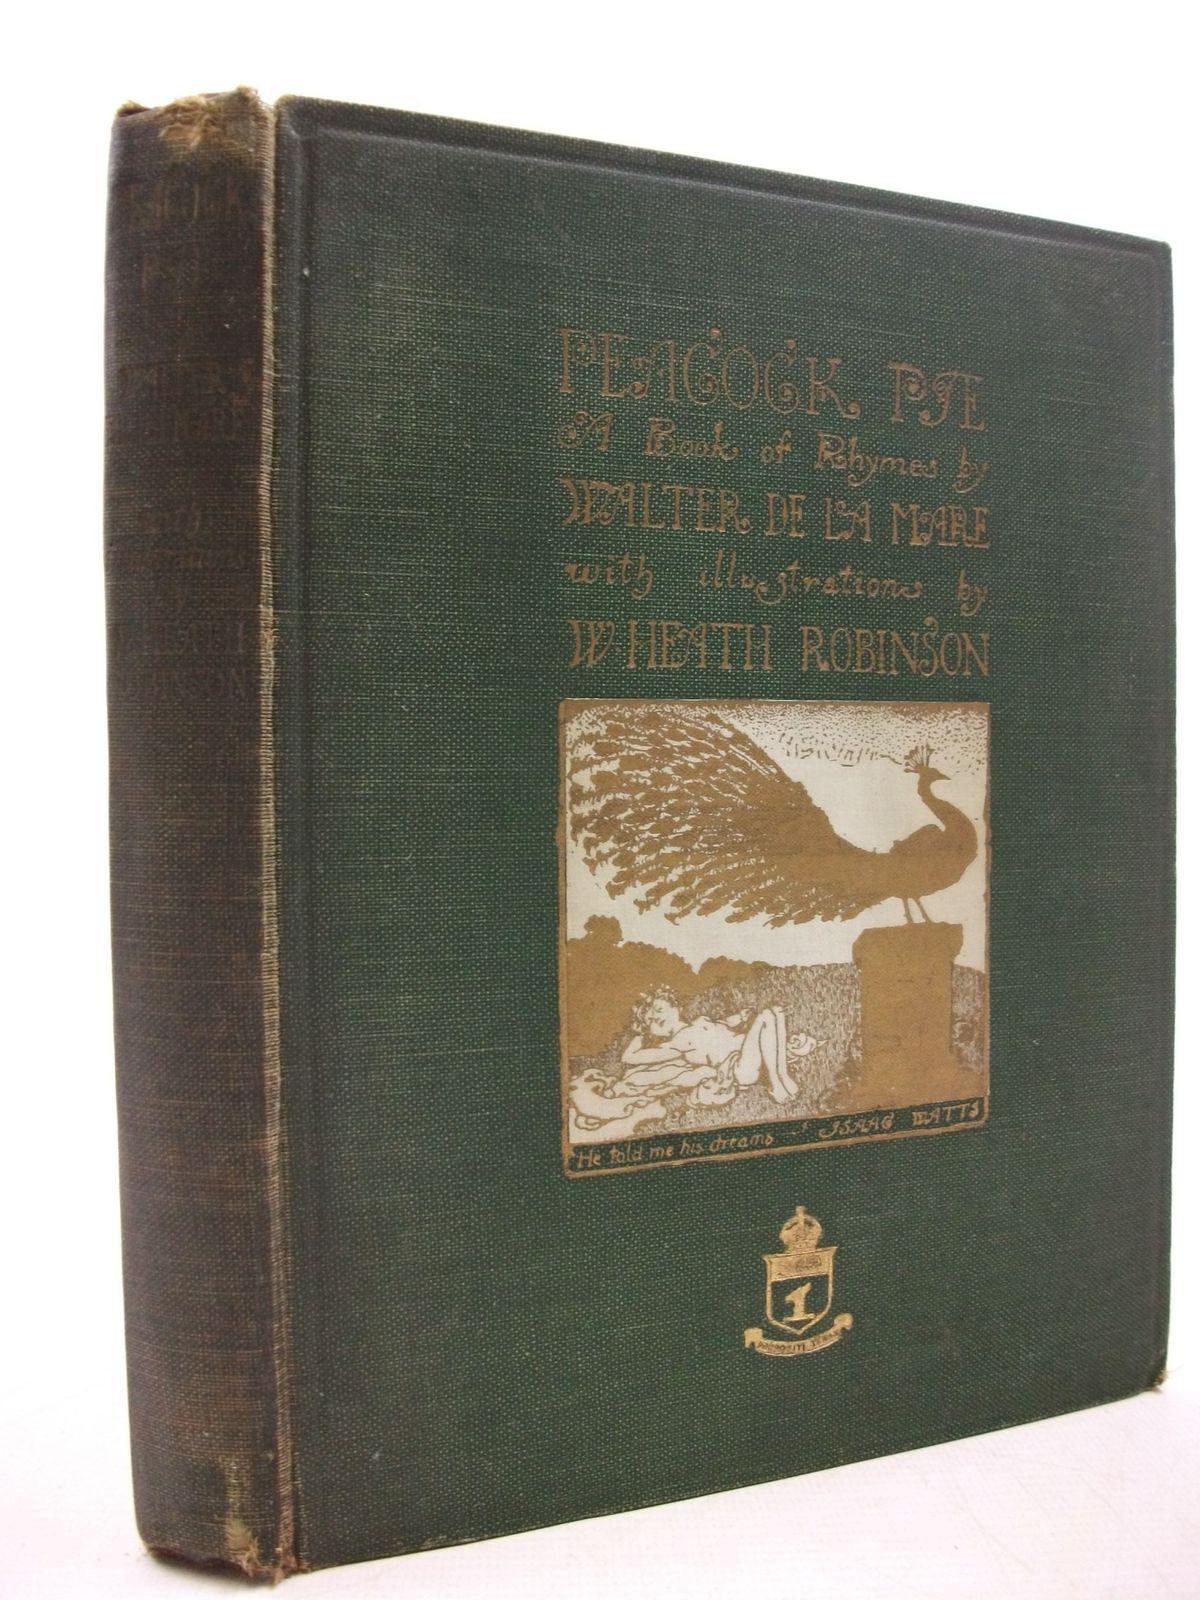 Photo of PEACOCK PIE - A BOOK OF RHYMES written by De La Mare, Walter illustrated by Robinson, W. Heath published by Constable and Company Ltd. (STOCK CODE: 2111414)  for sale by Stella & Rose's Books